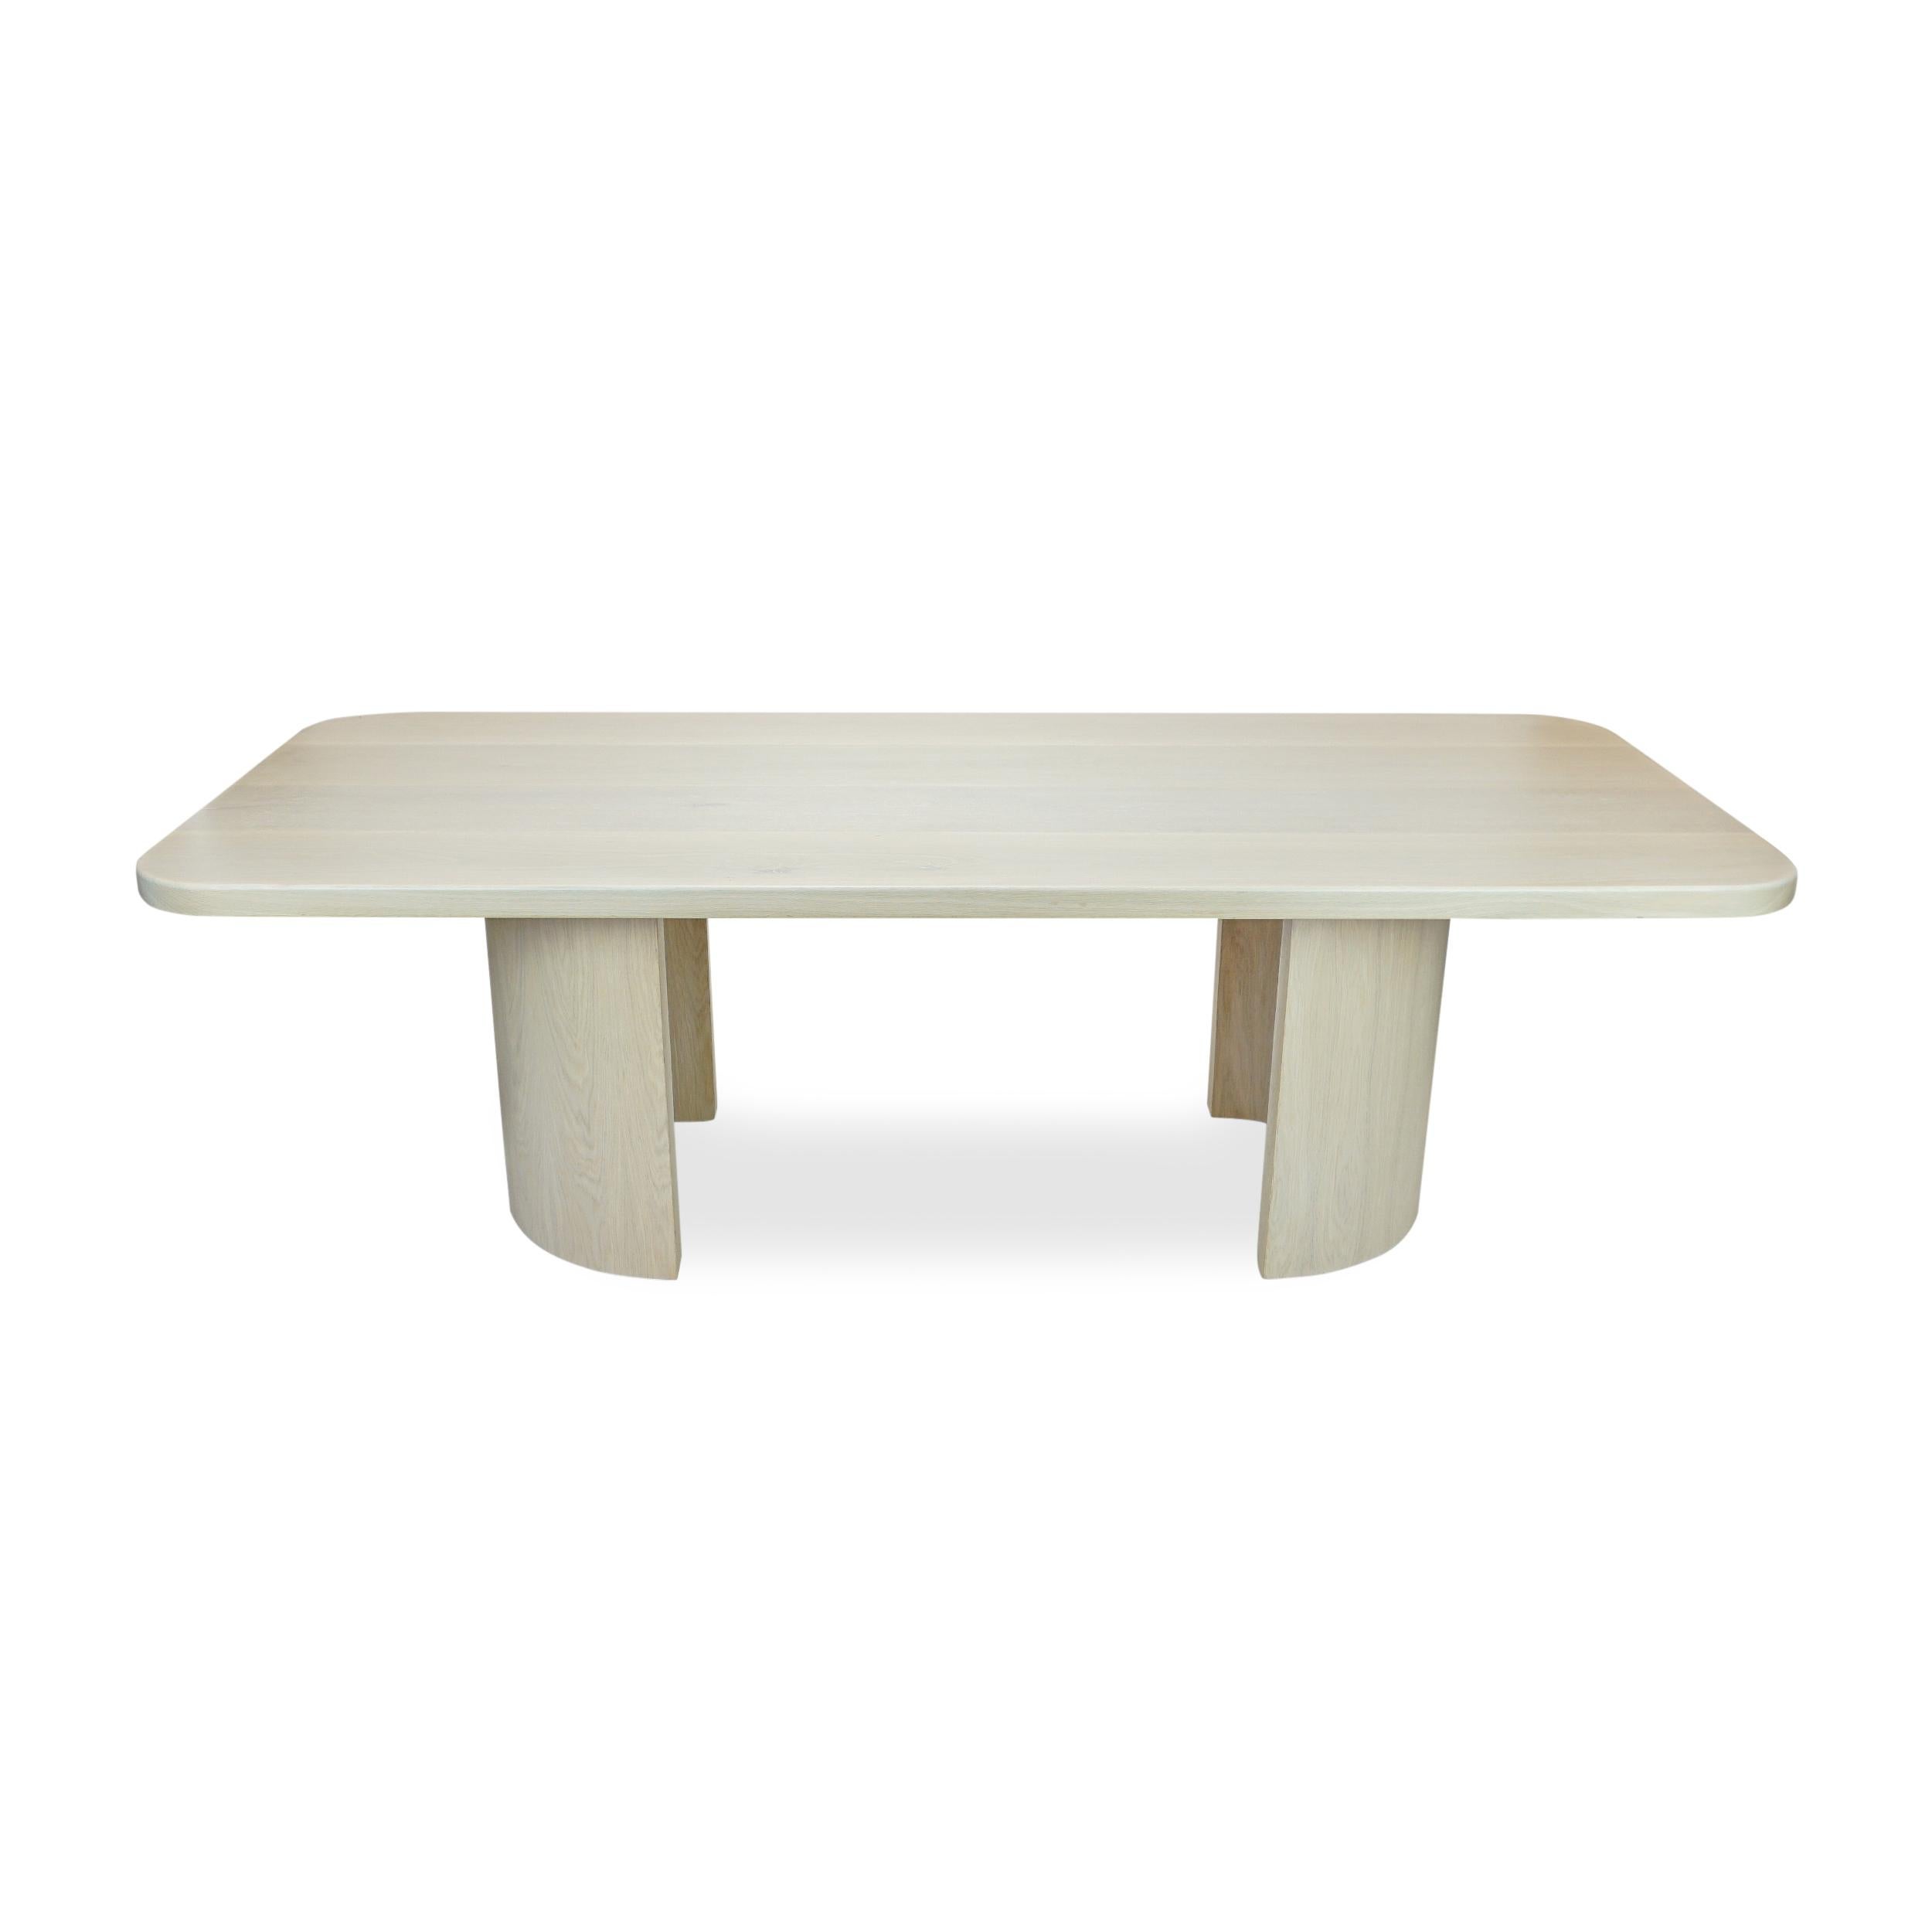 Contemporary Modern Rectangular White Oak Dining Table W/ Half Cylinder Legs + Round Corners For Sale